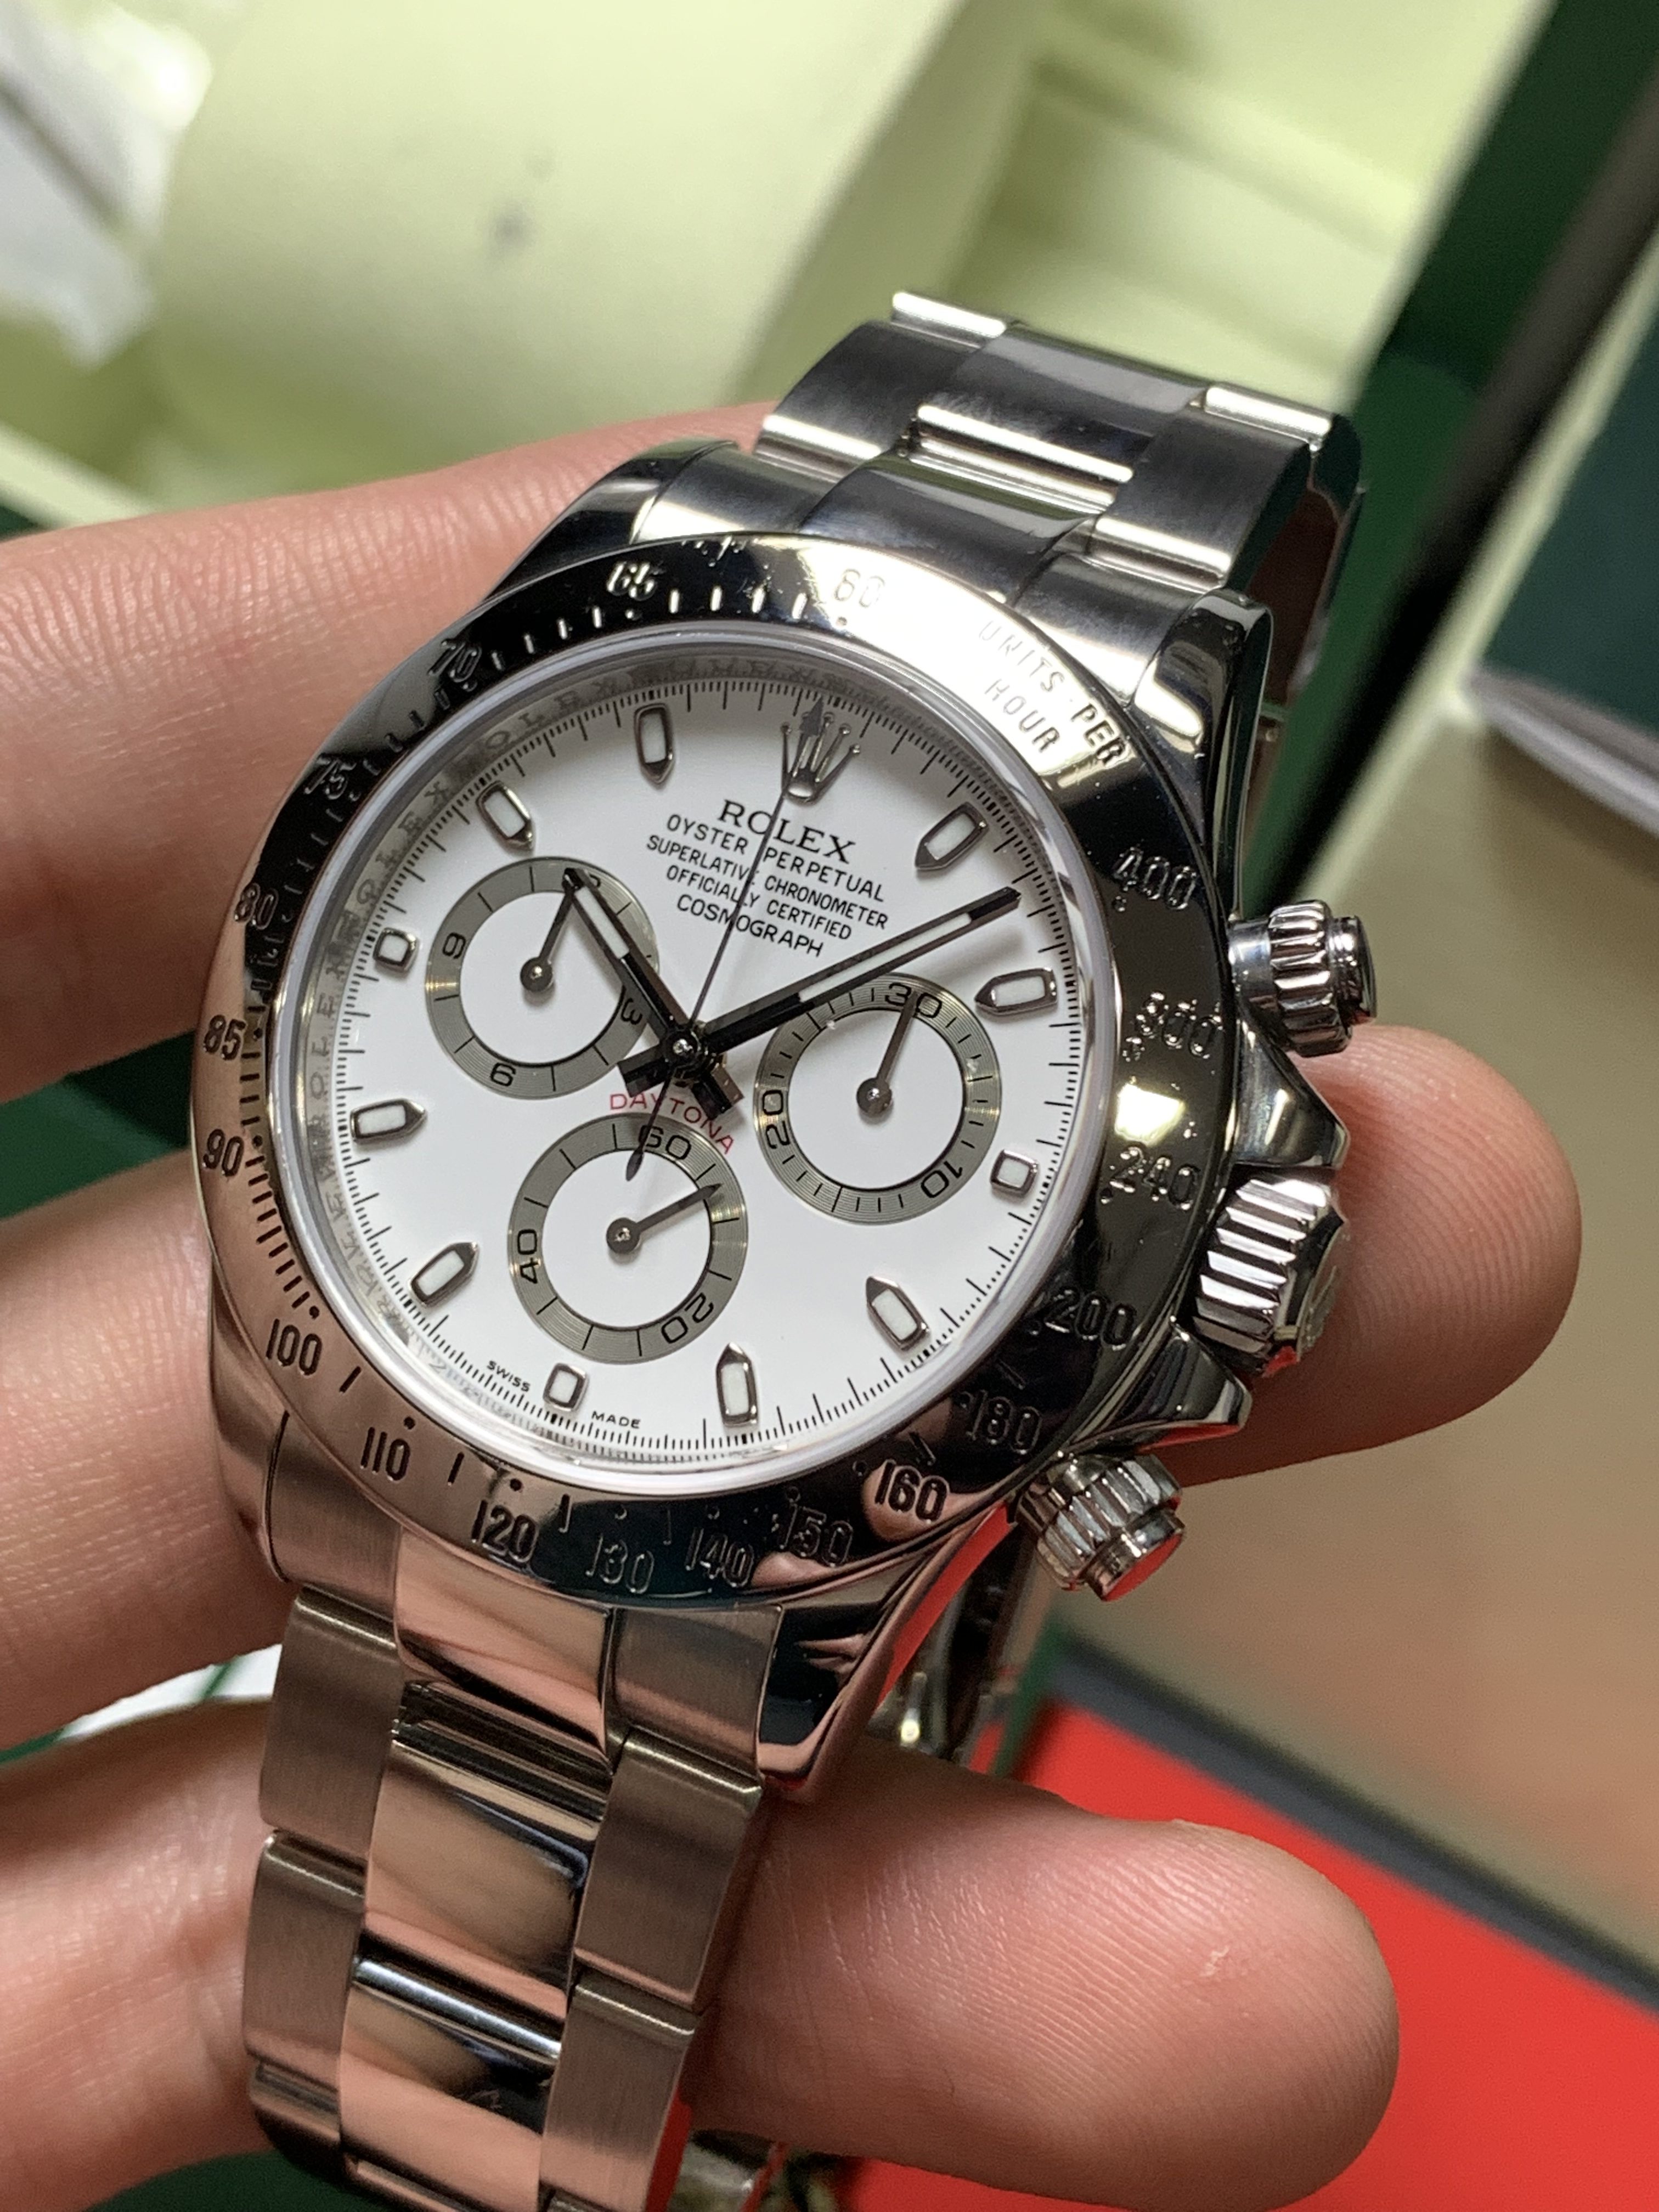 ROLEX DAYTONA 116520 WHITE DIAL STAINLESS STEEL - Carr Watches